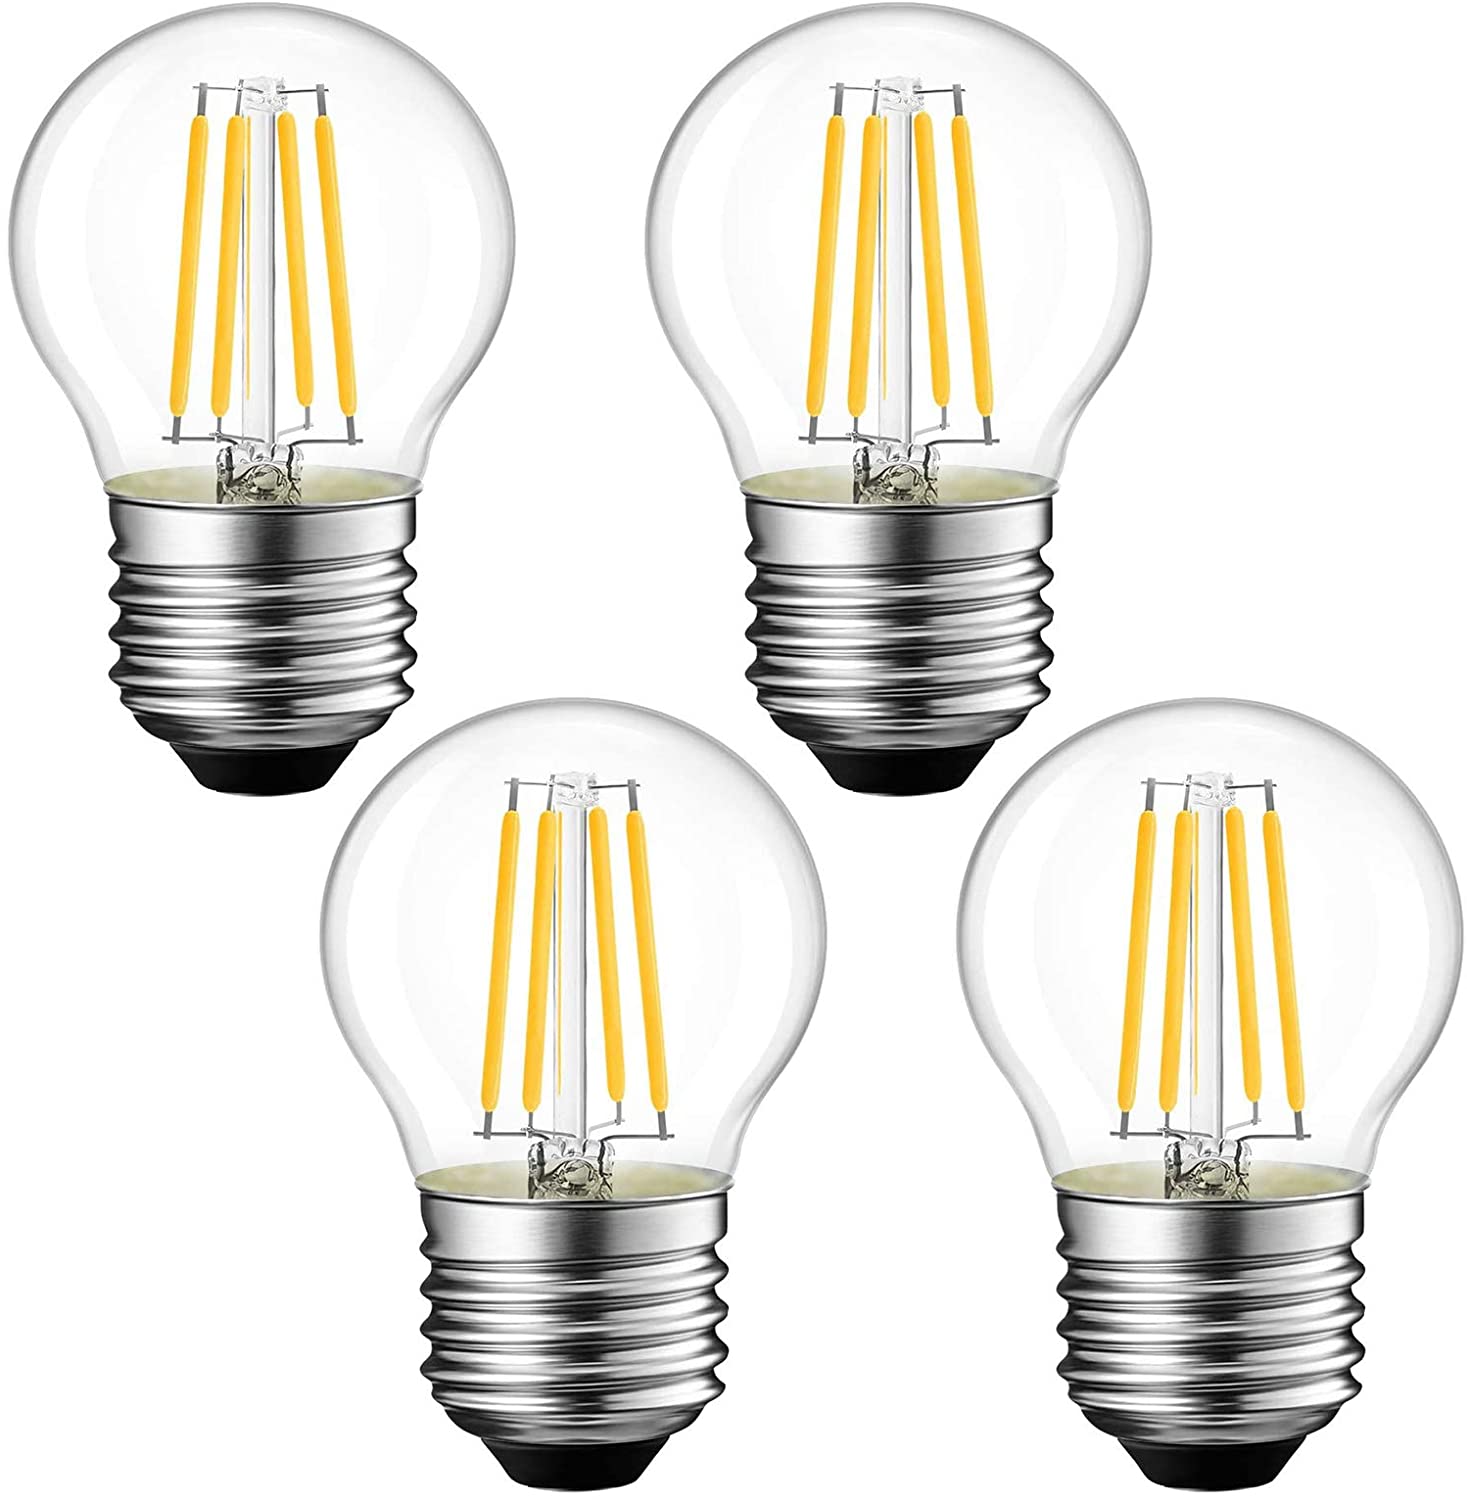 China Supplier White Led Edison Bulbs - G45 LED Industrial Vintage Edison Style LED Filament Light Bulb Dimmable Soft Warm – Firstech